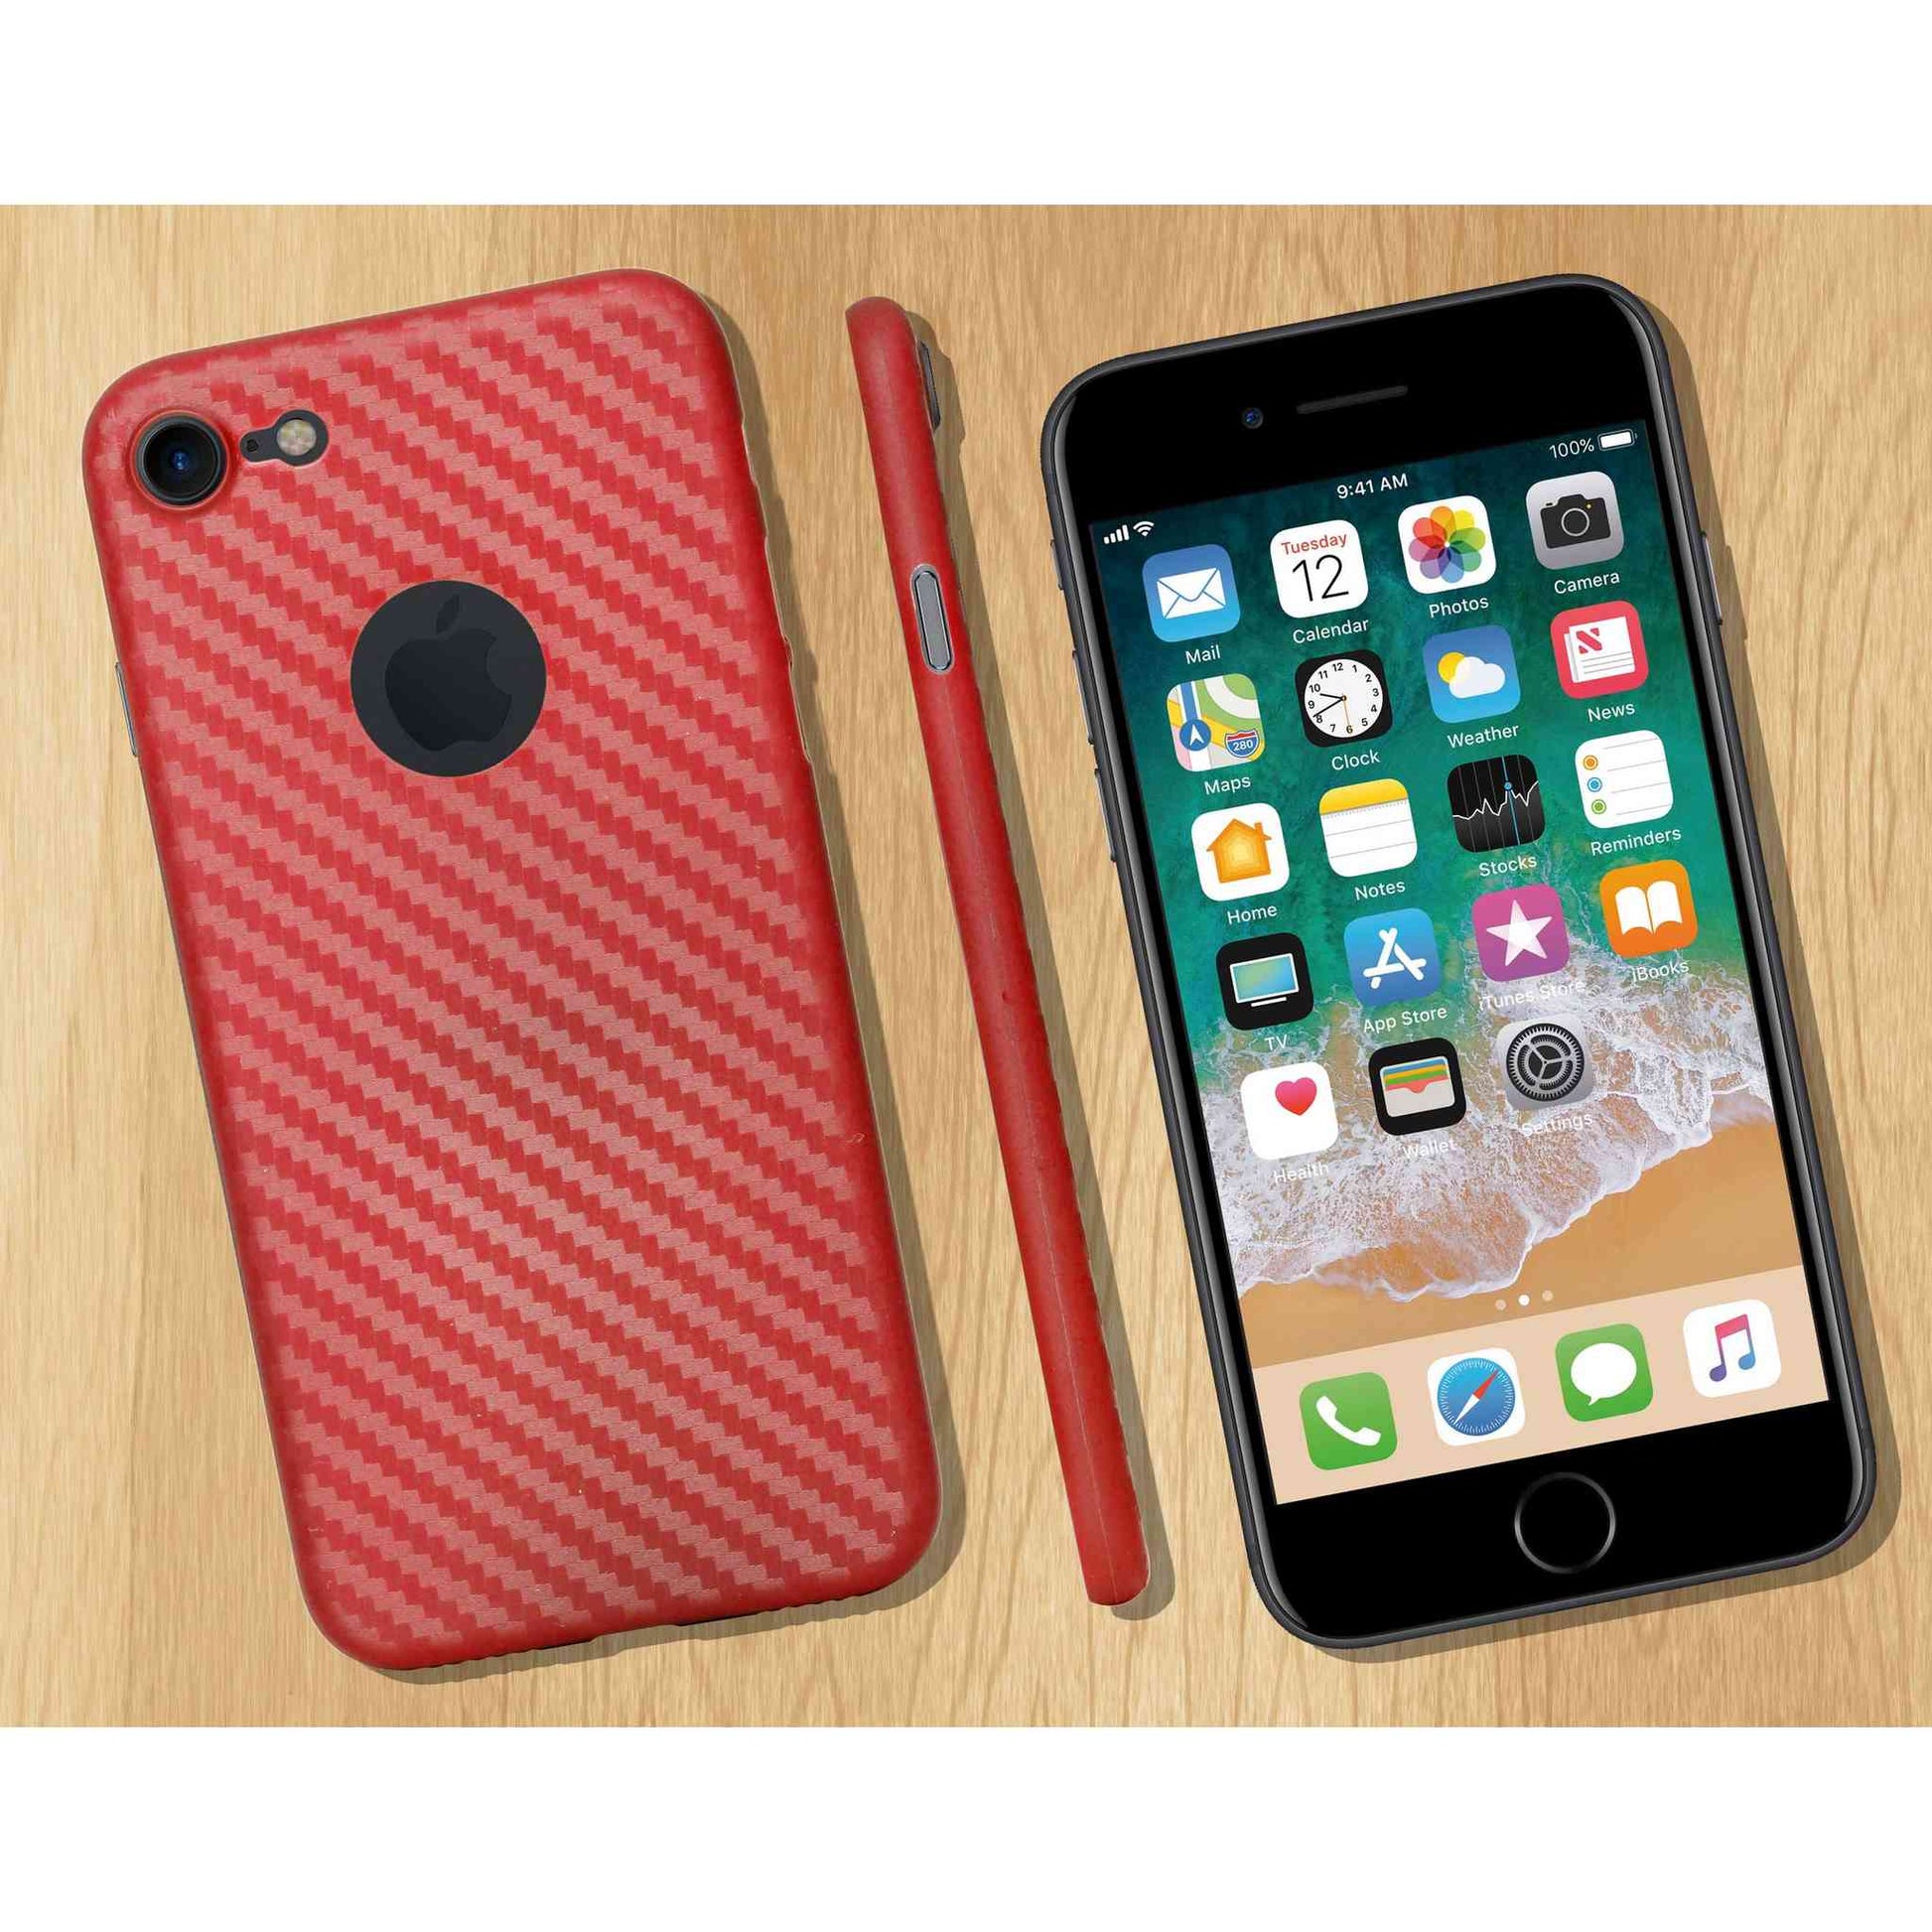 Indian Petals Polycarbonate 3D Pattern Protective Mobile Back Case Cover for Apple iPhone 7, Red - Indian Petals